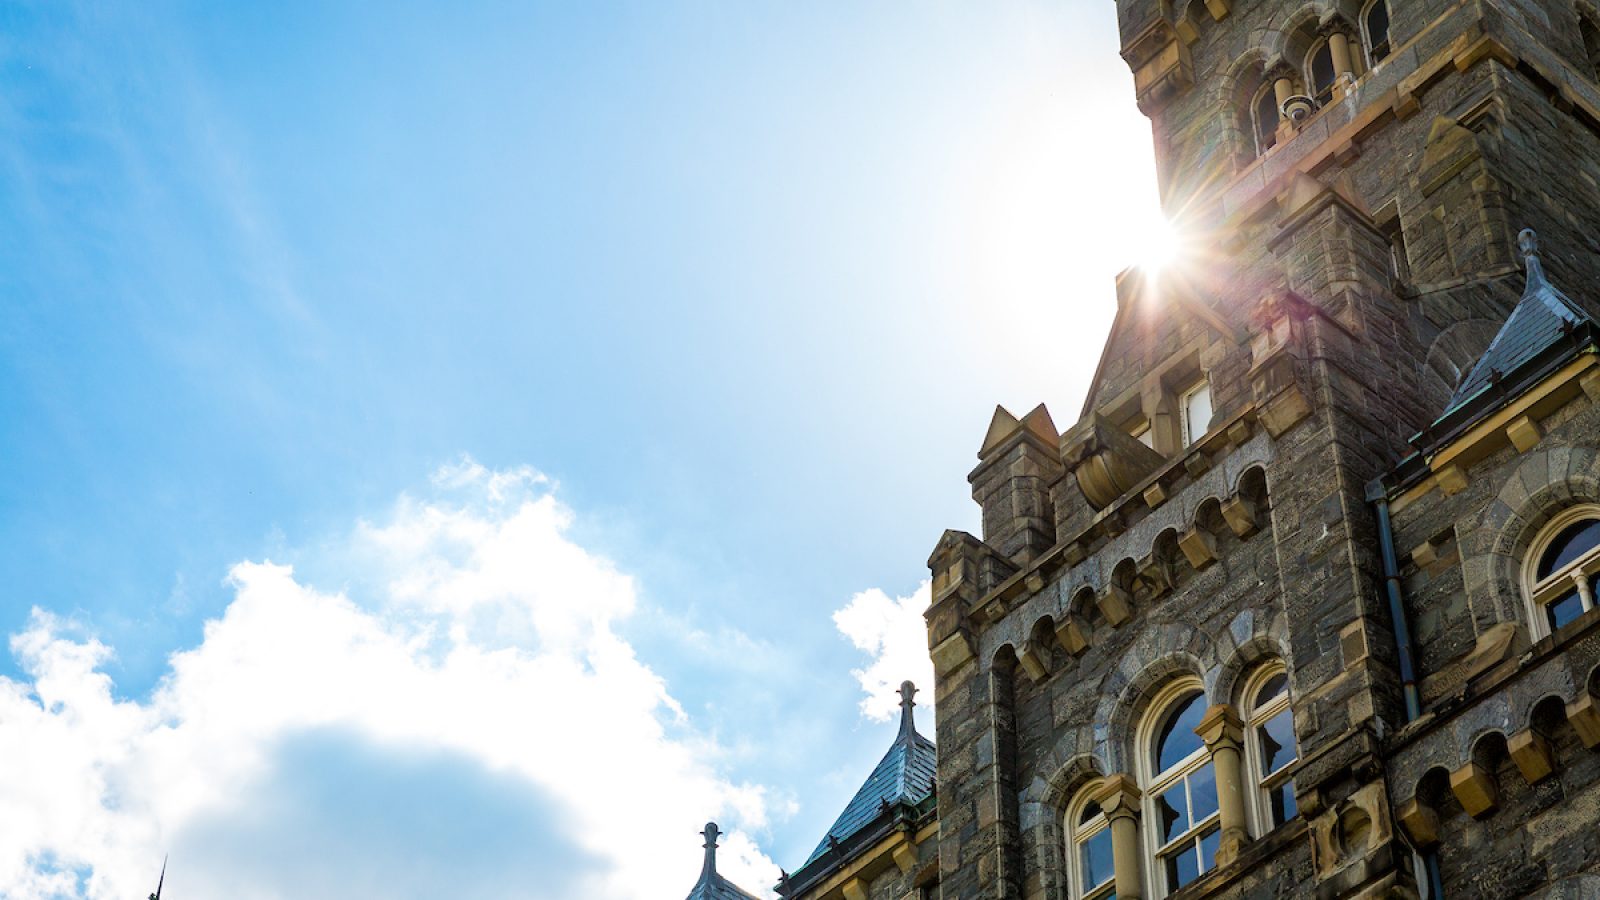 An image of Healy Hall with a sun flare peeking out from behind the clock tower